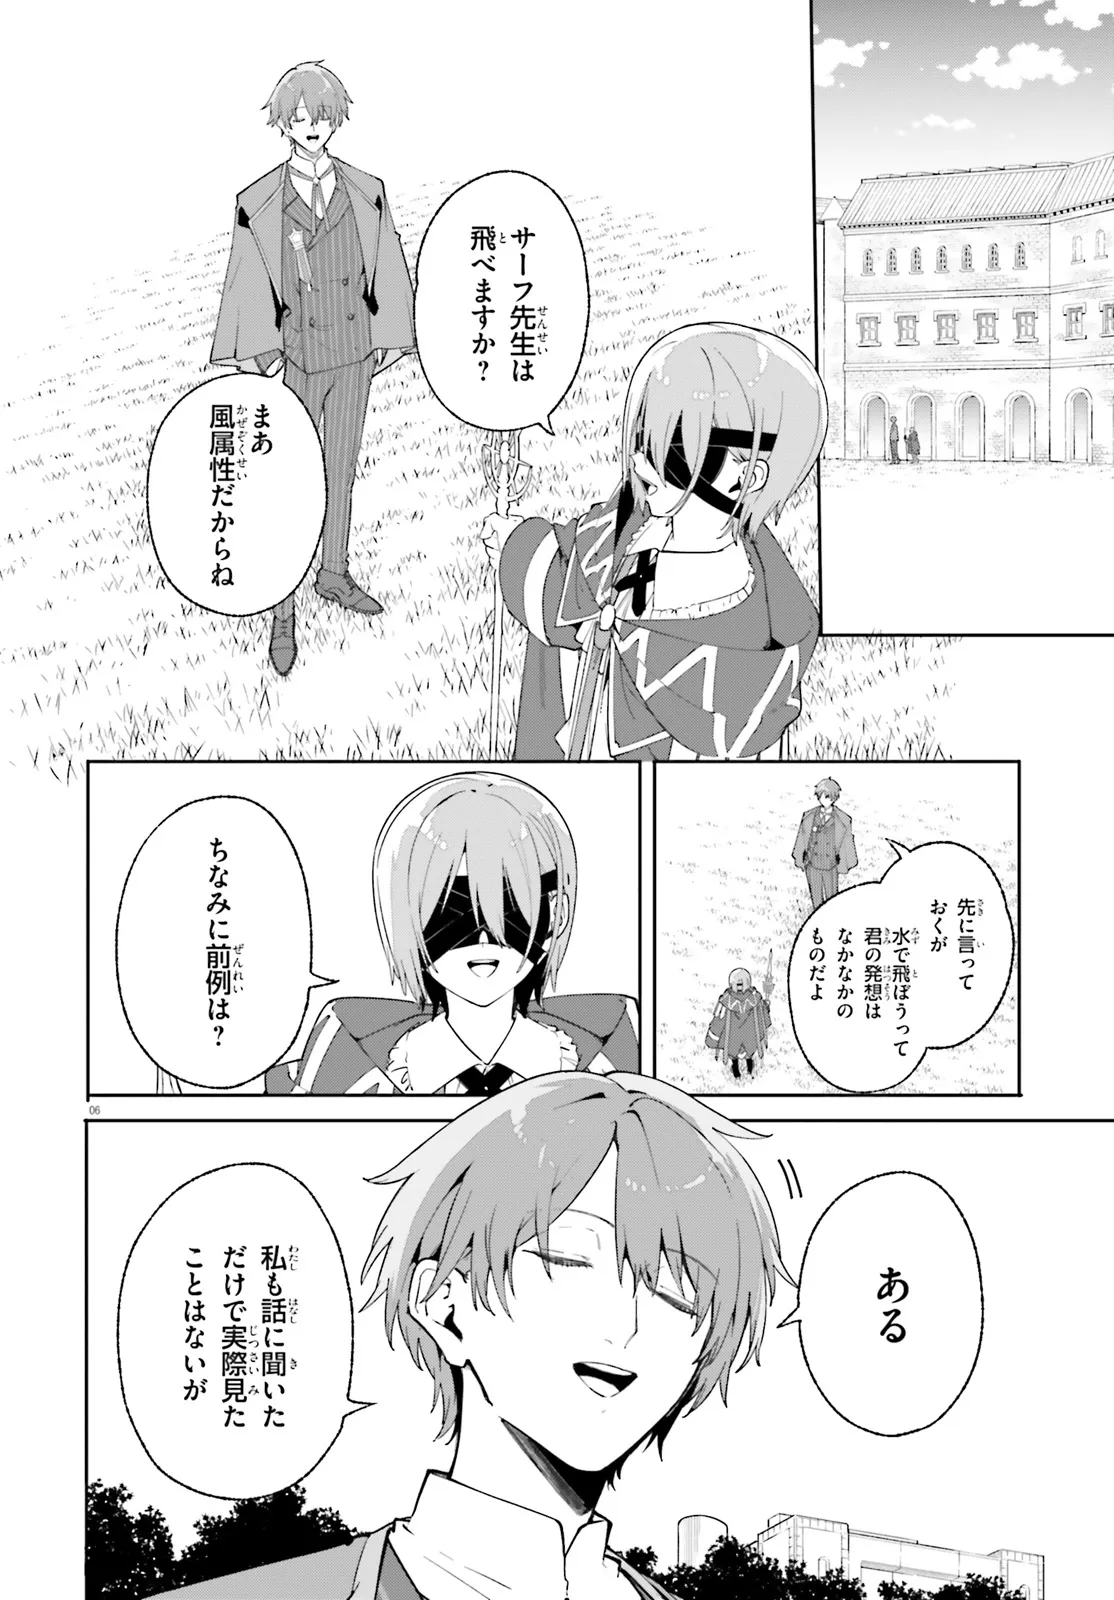 Kunon the Sorcerer Can See Kunon the Sorcerer Can See Through 魔術師クノンは見えている 第27.1話 - Page 6